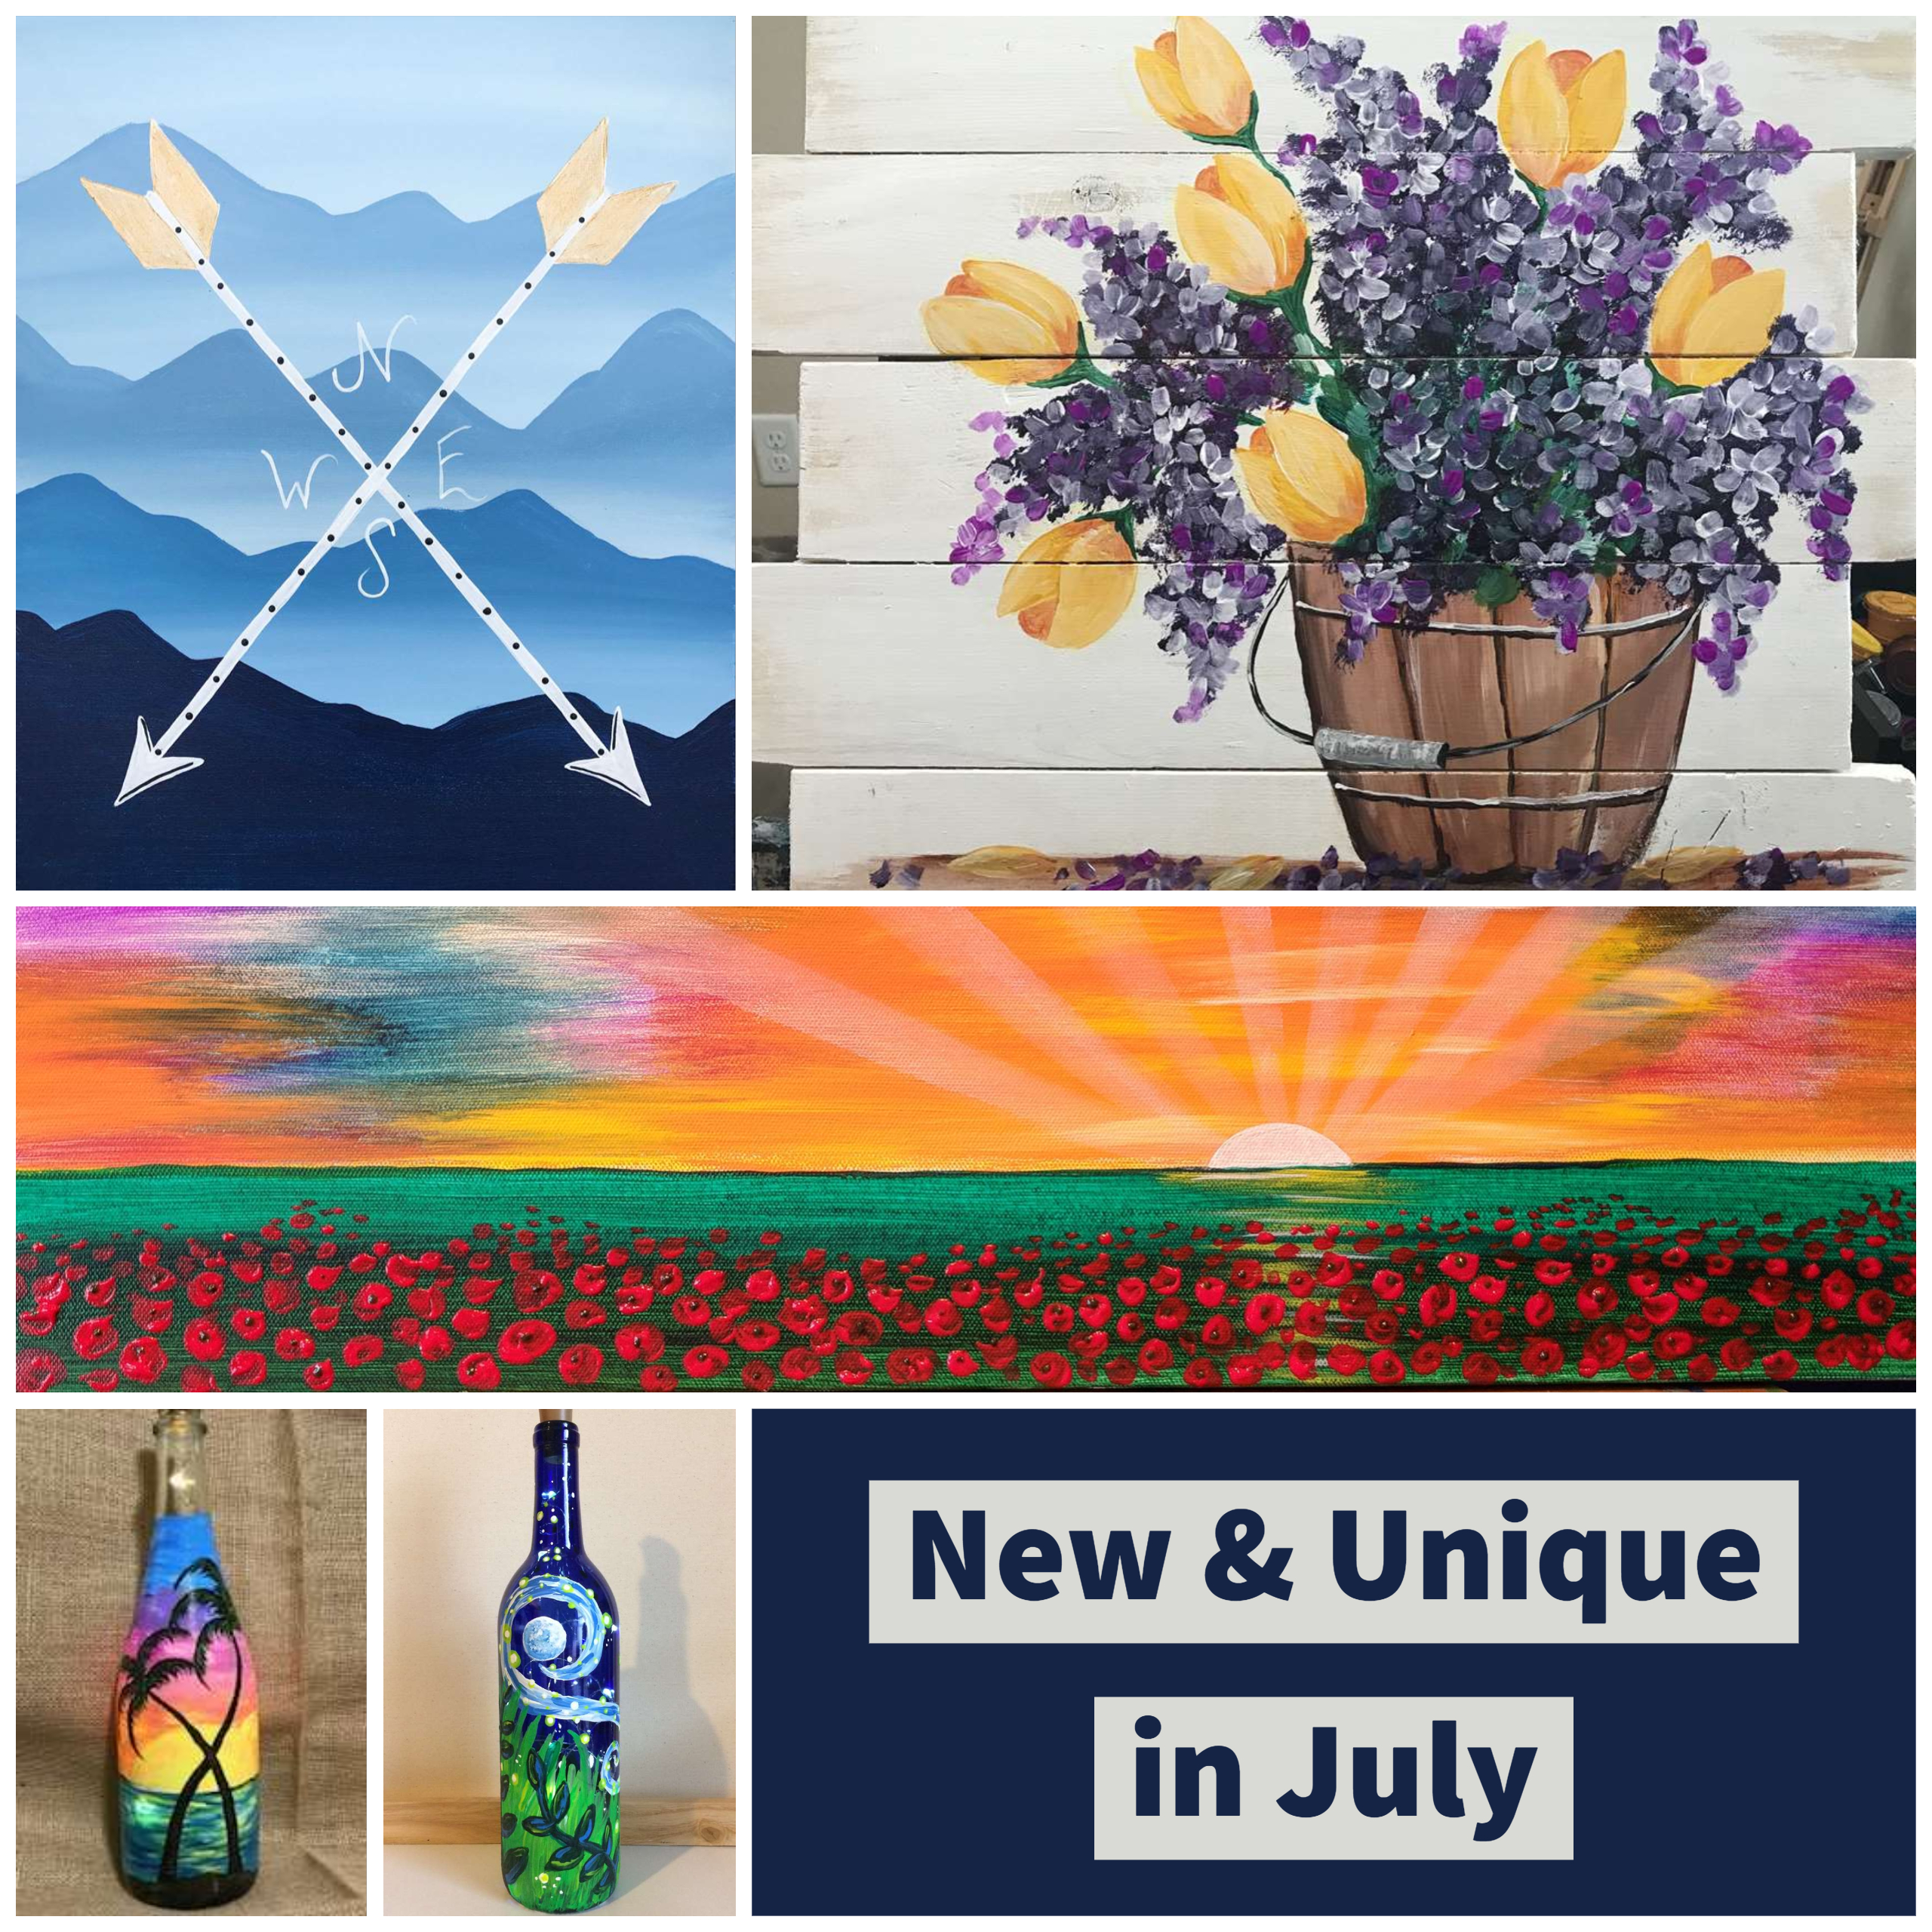 New & Unique in July!